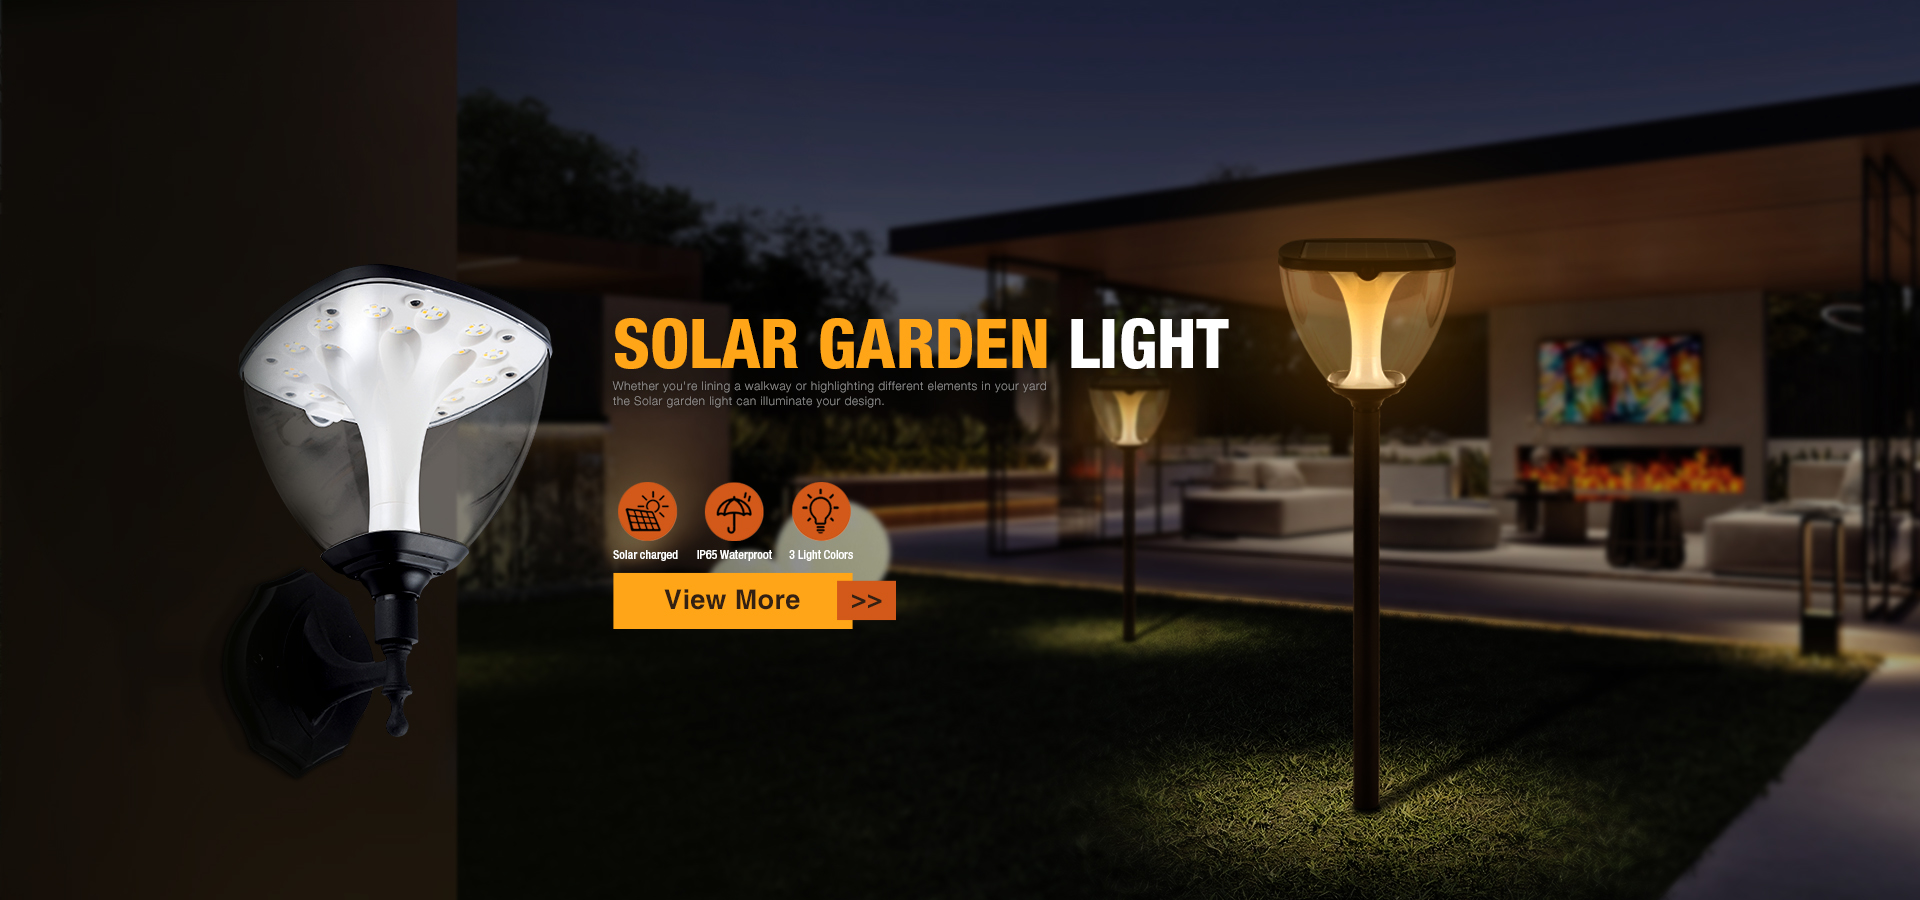 These solar lights are small and simple enough that they can disappear into the landscape